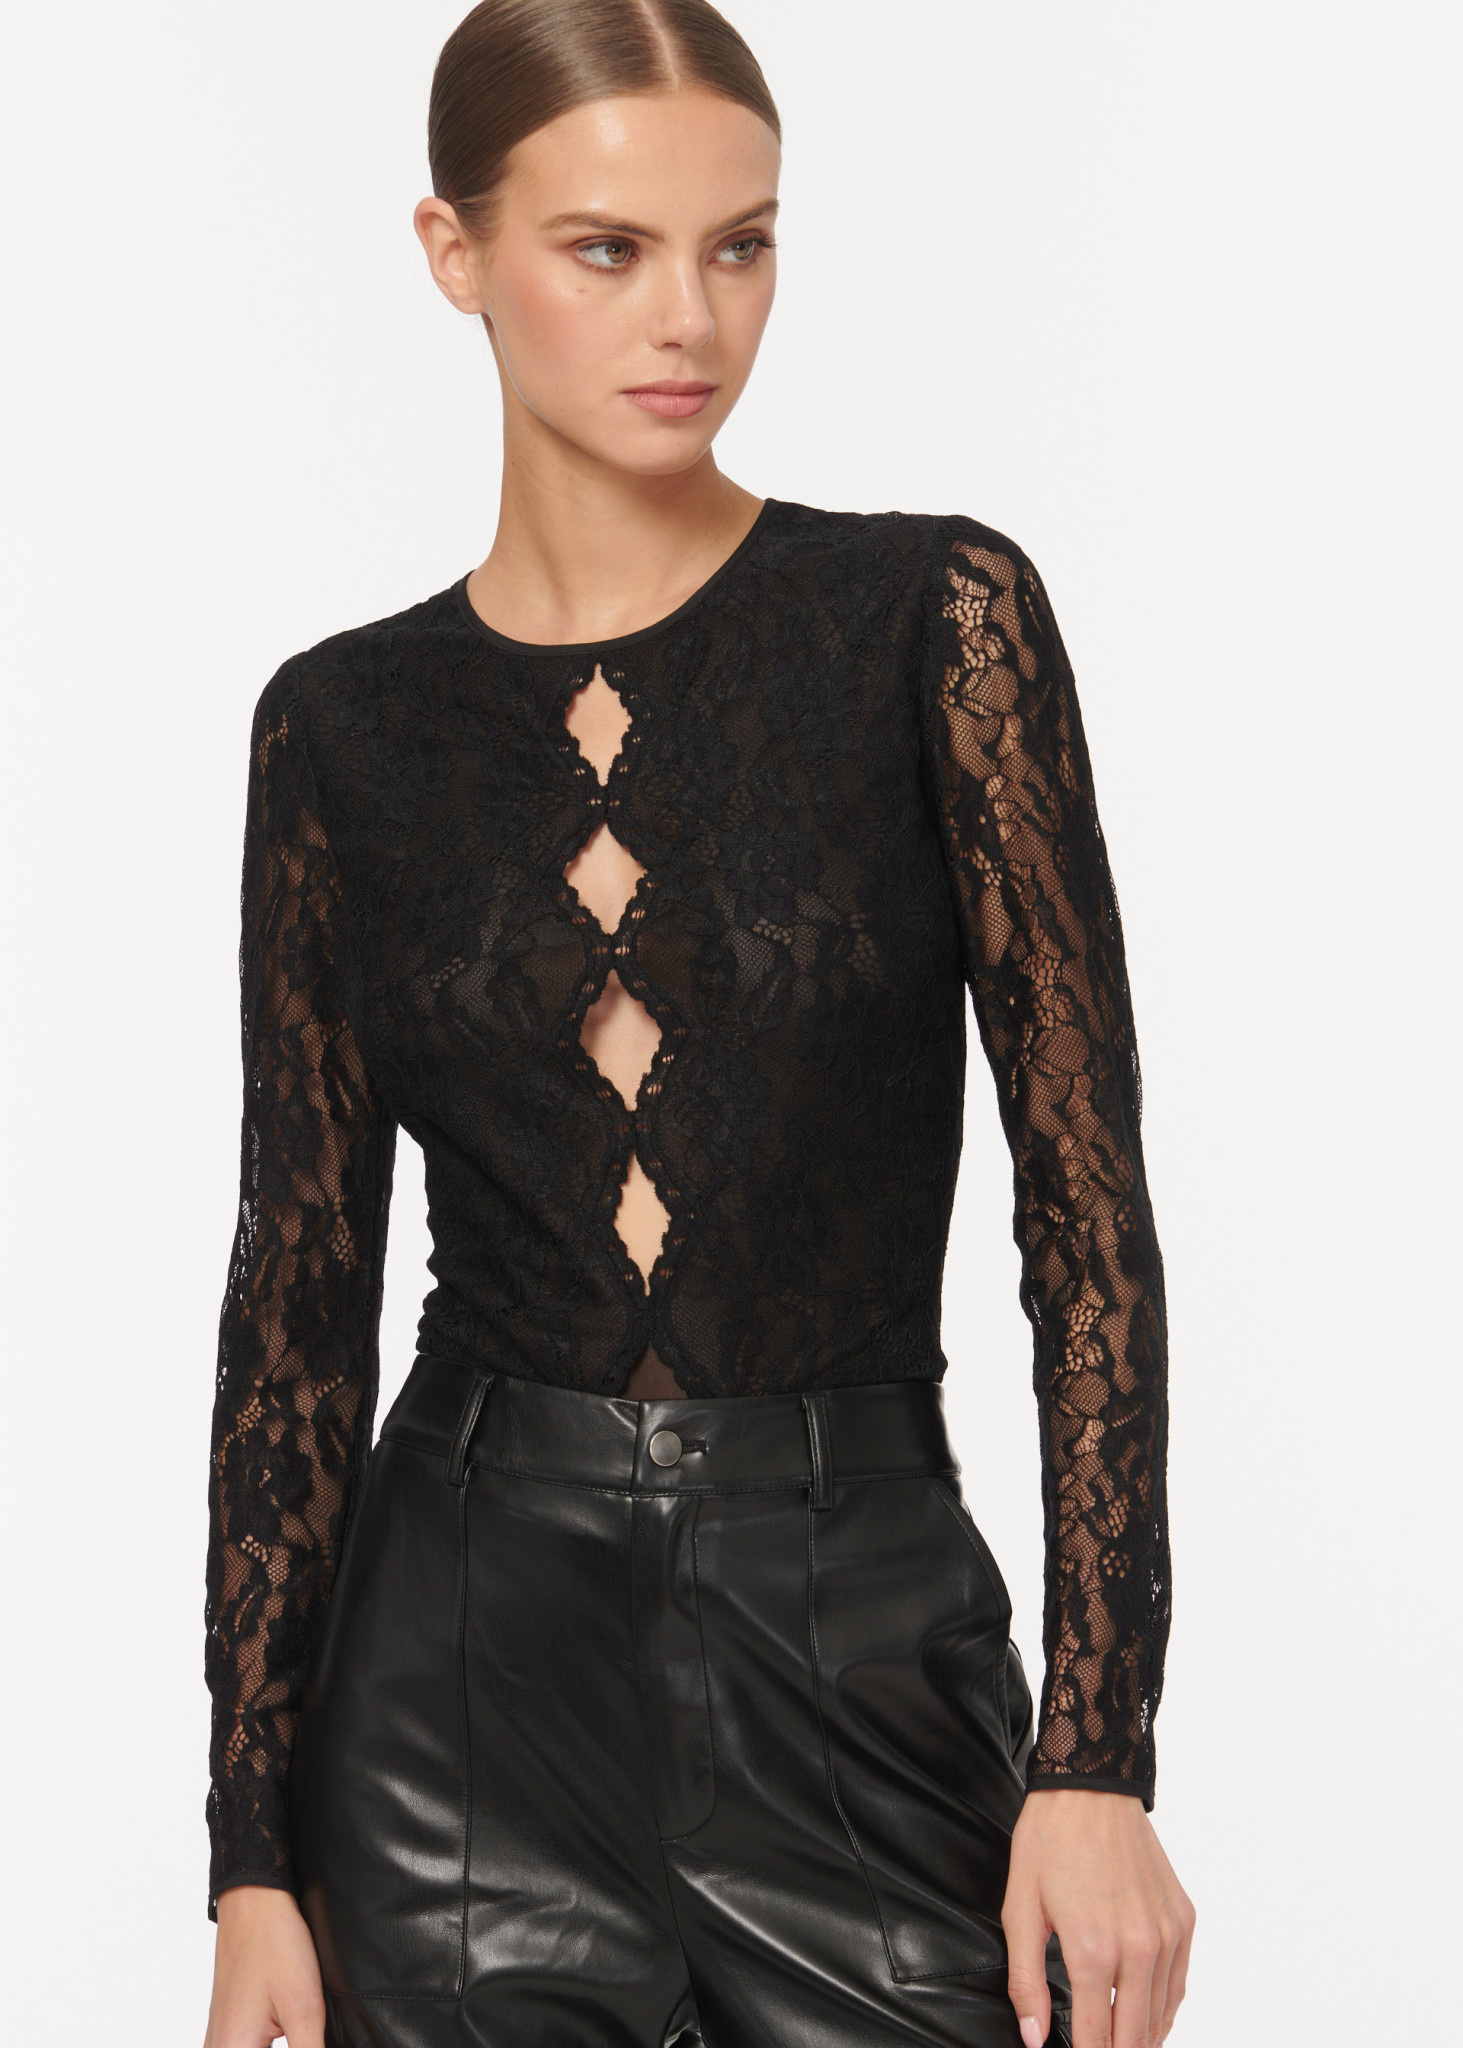 Discover Timeless Elegance with CAMI NYC Josefina Top in Black